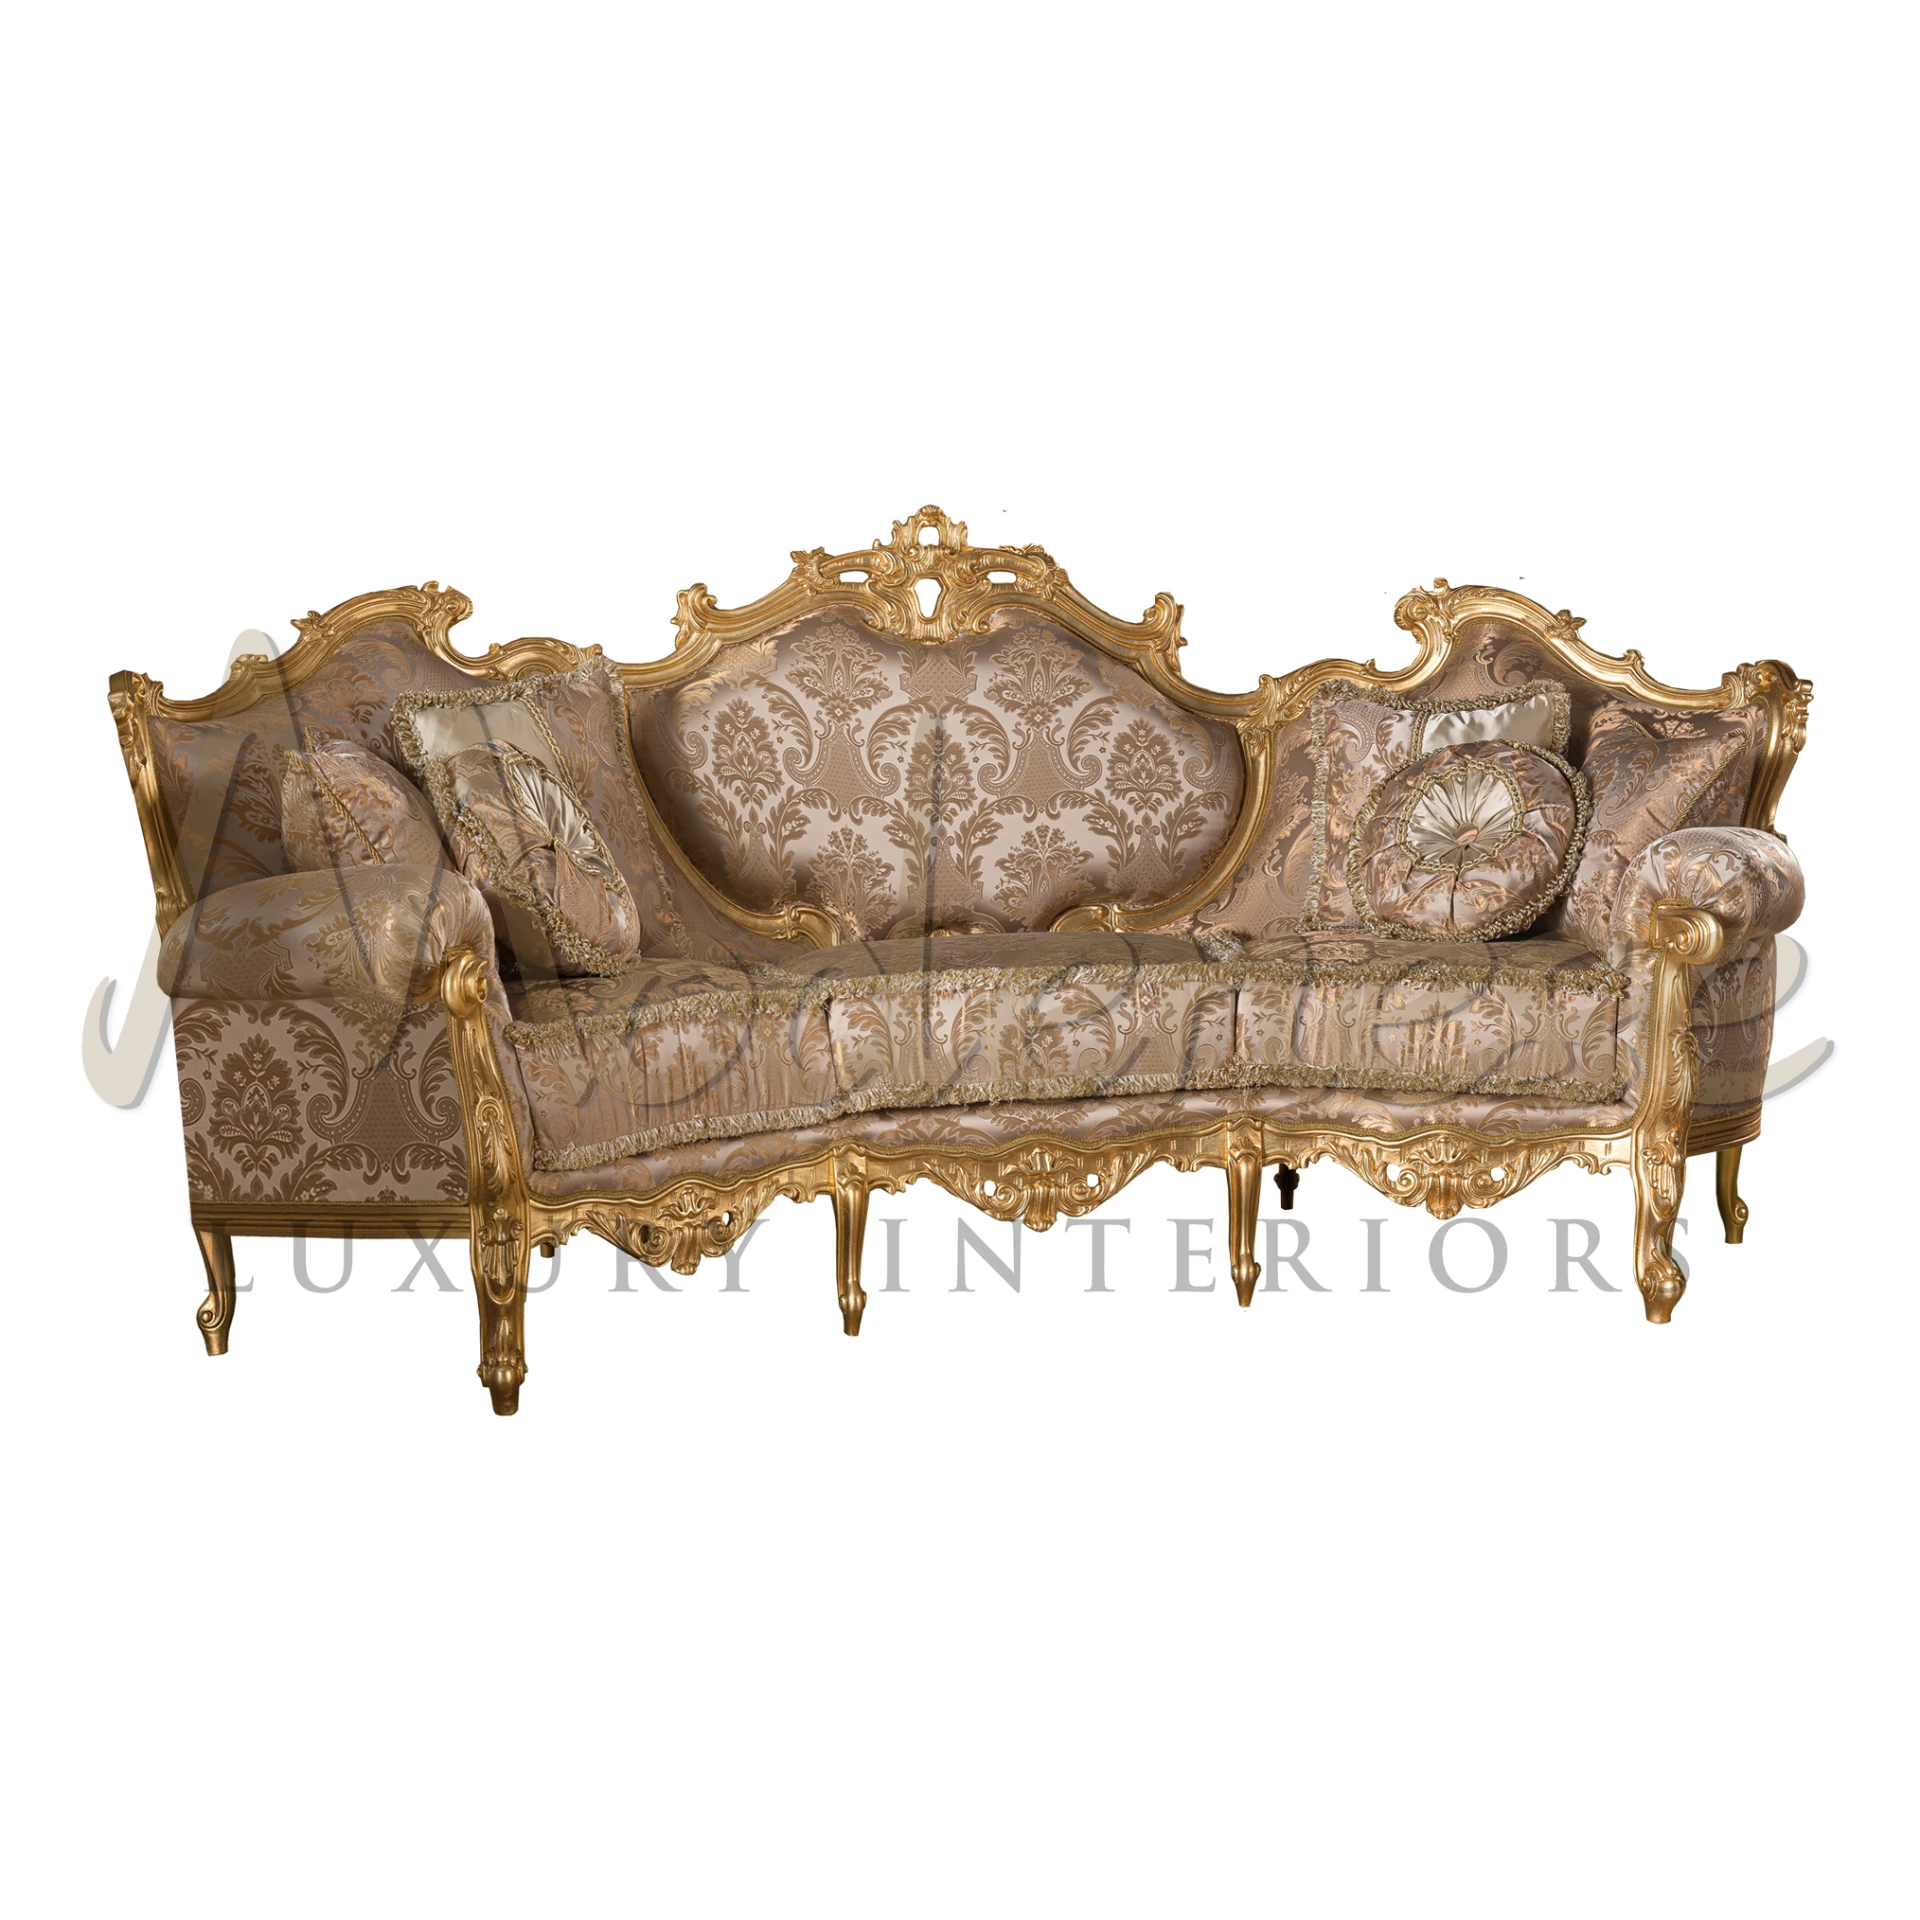 Italian Baroque Sofa: Handcrafted Opulence for Refined Interiors